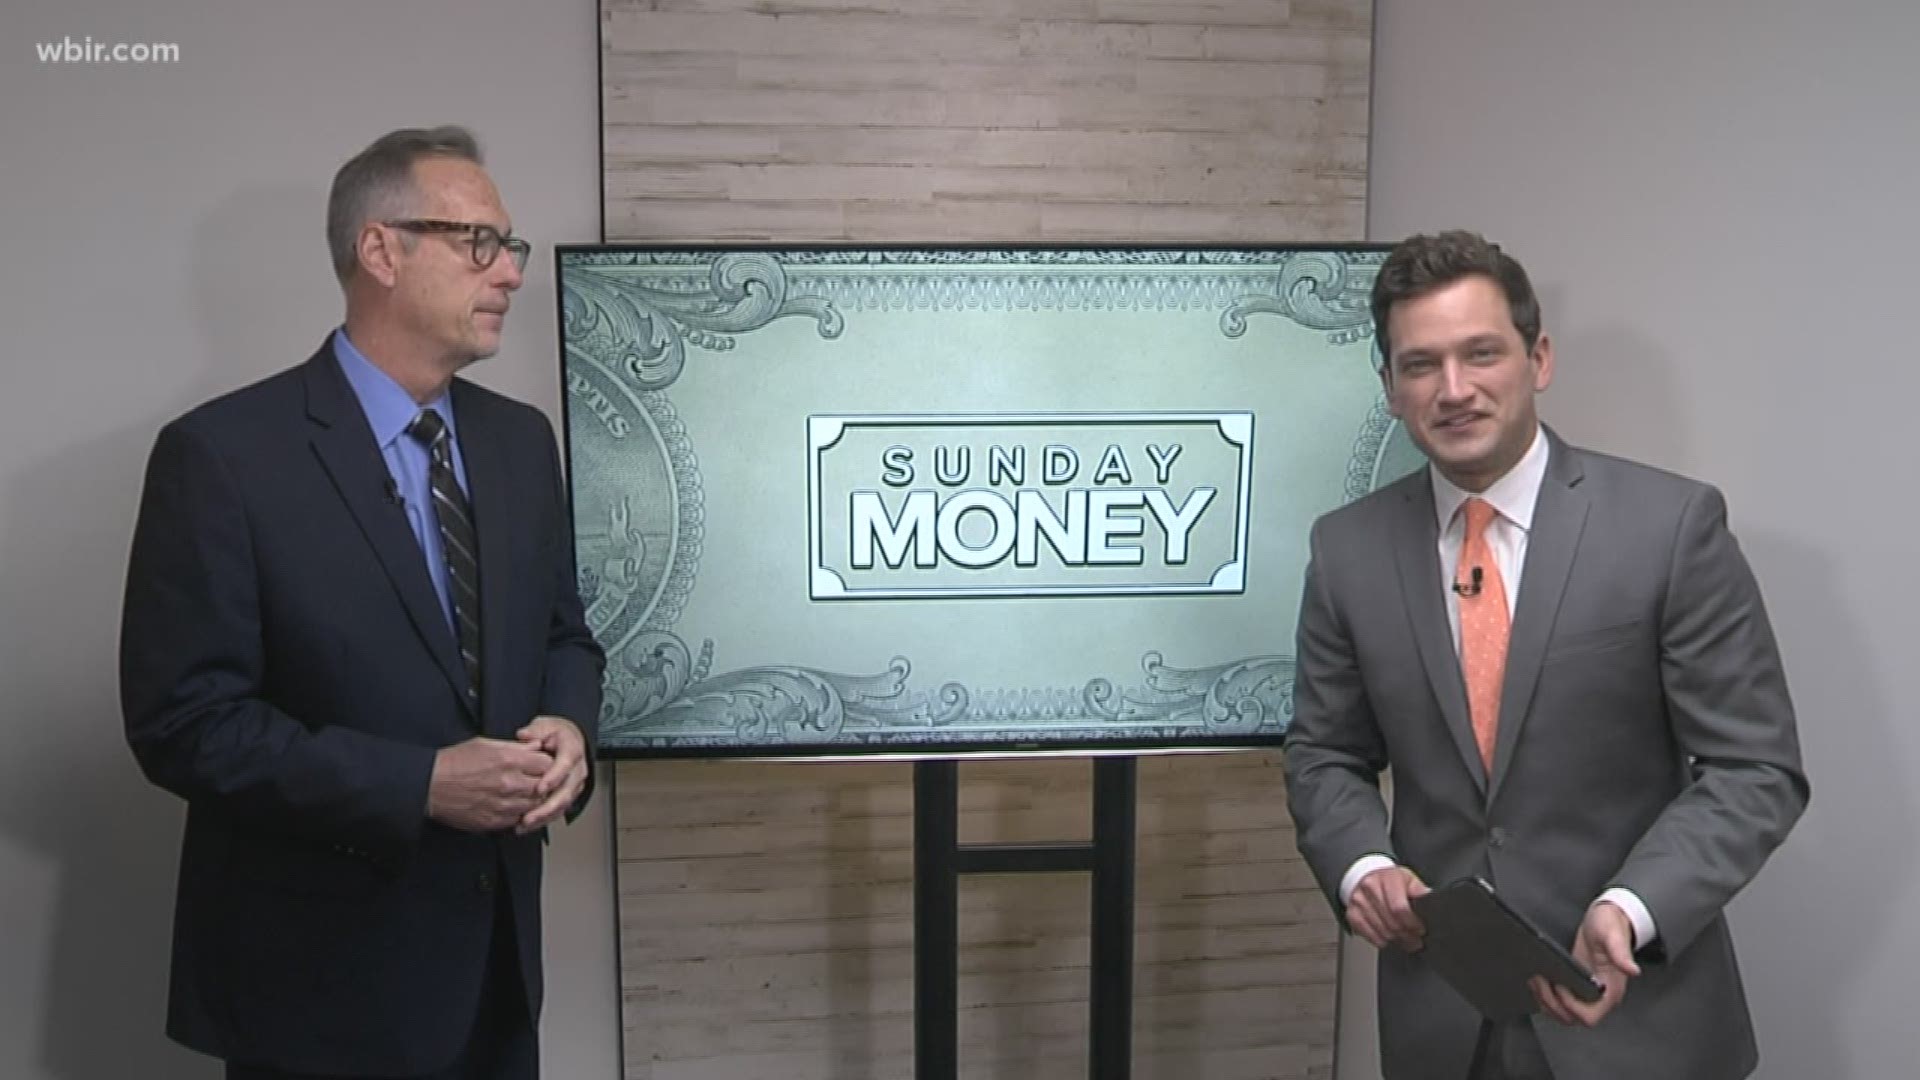 Moneyman Paul Fain with Asset Planning Corporation discusses saving for retirement versus saving for kids' college fund.